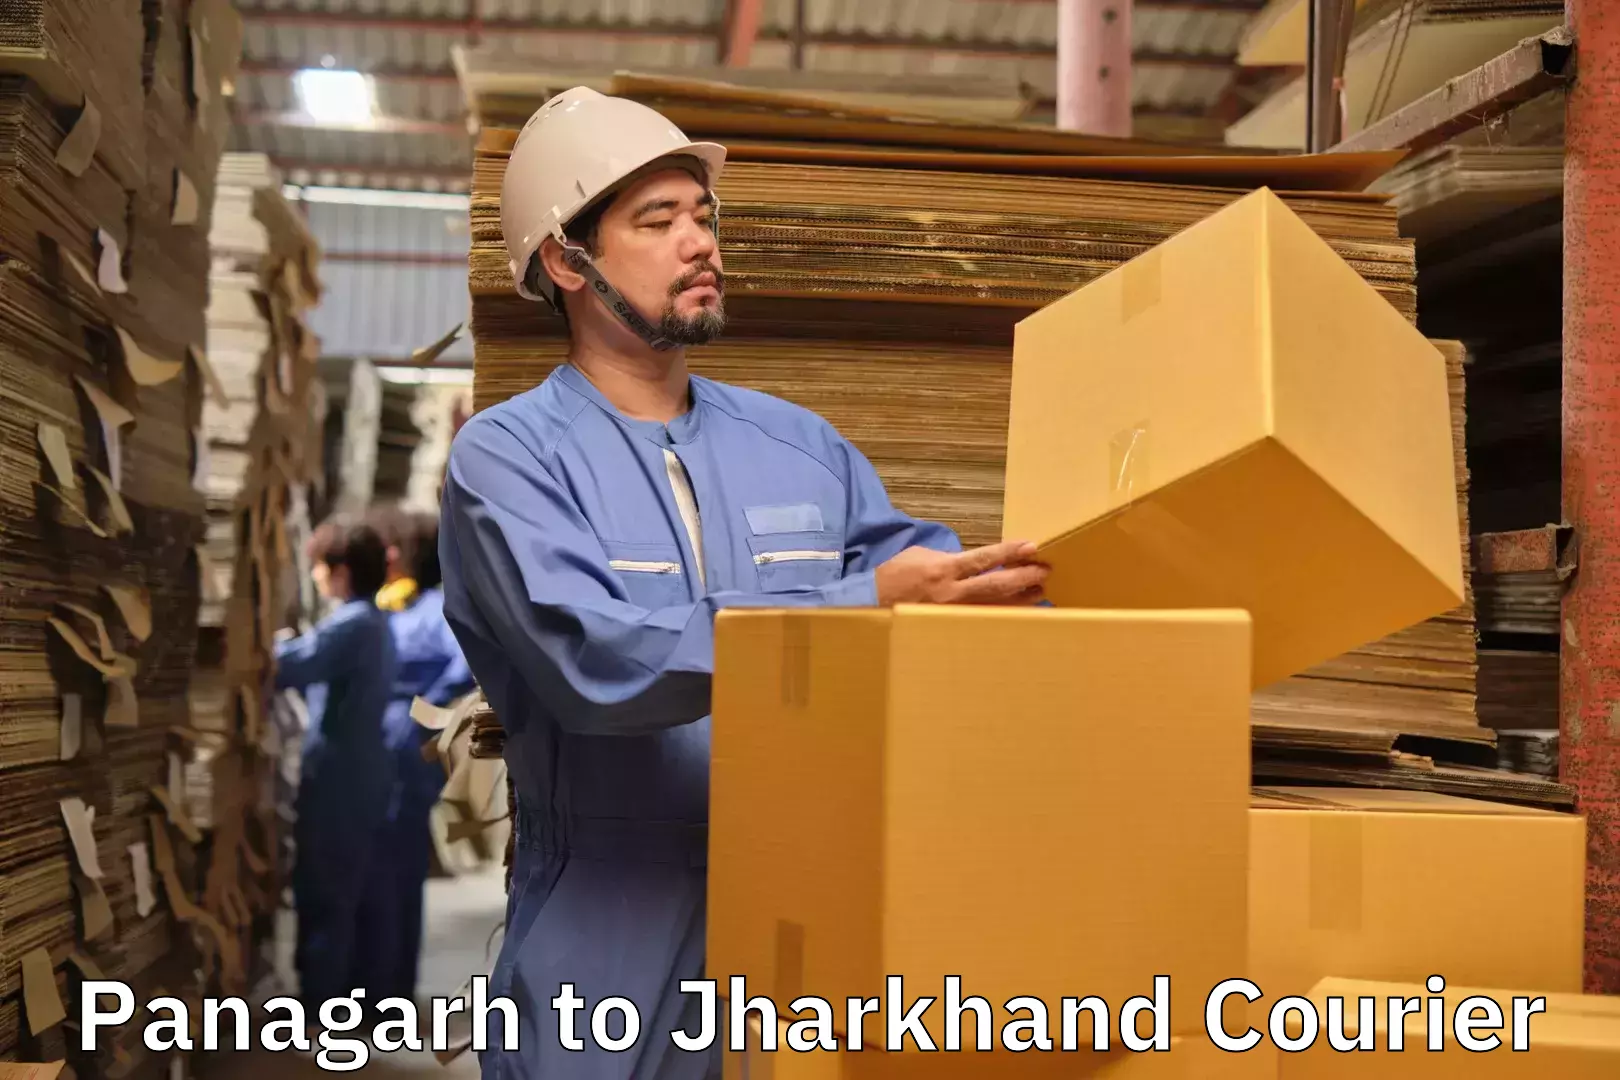 Baggage transport professionals Panagarh to Jharkhand